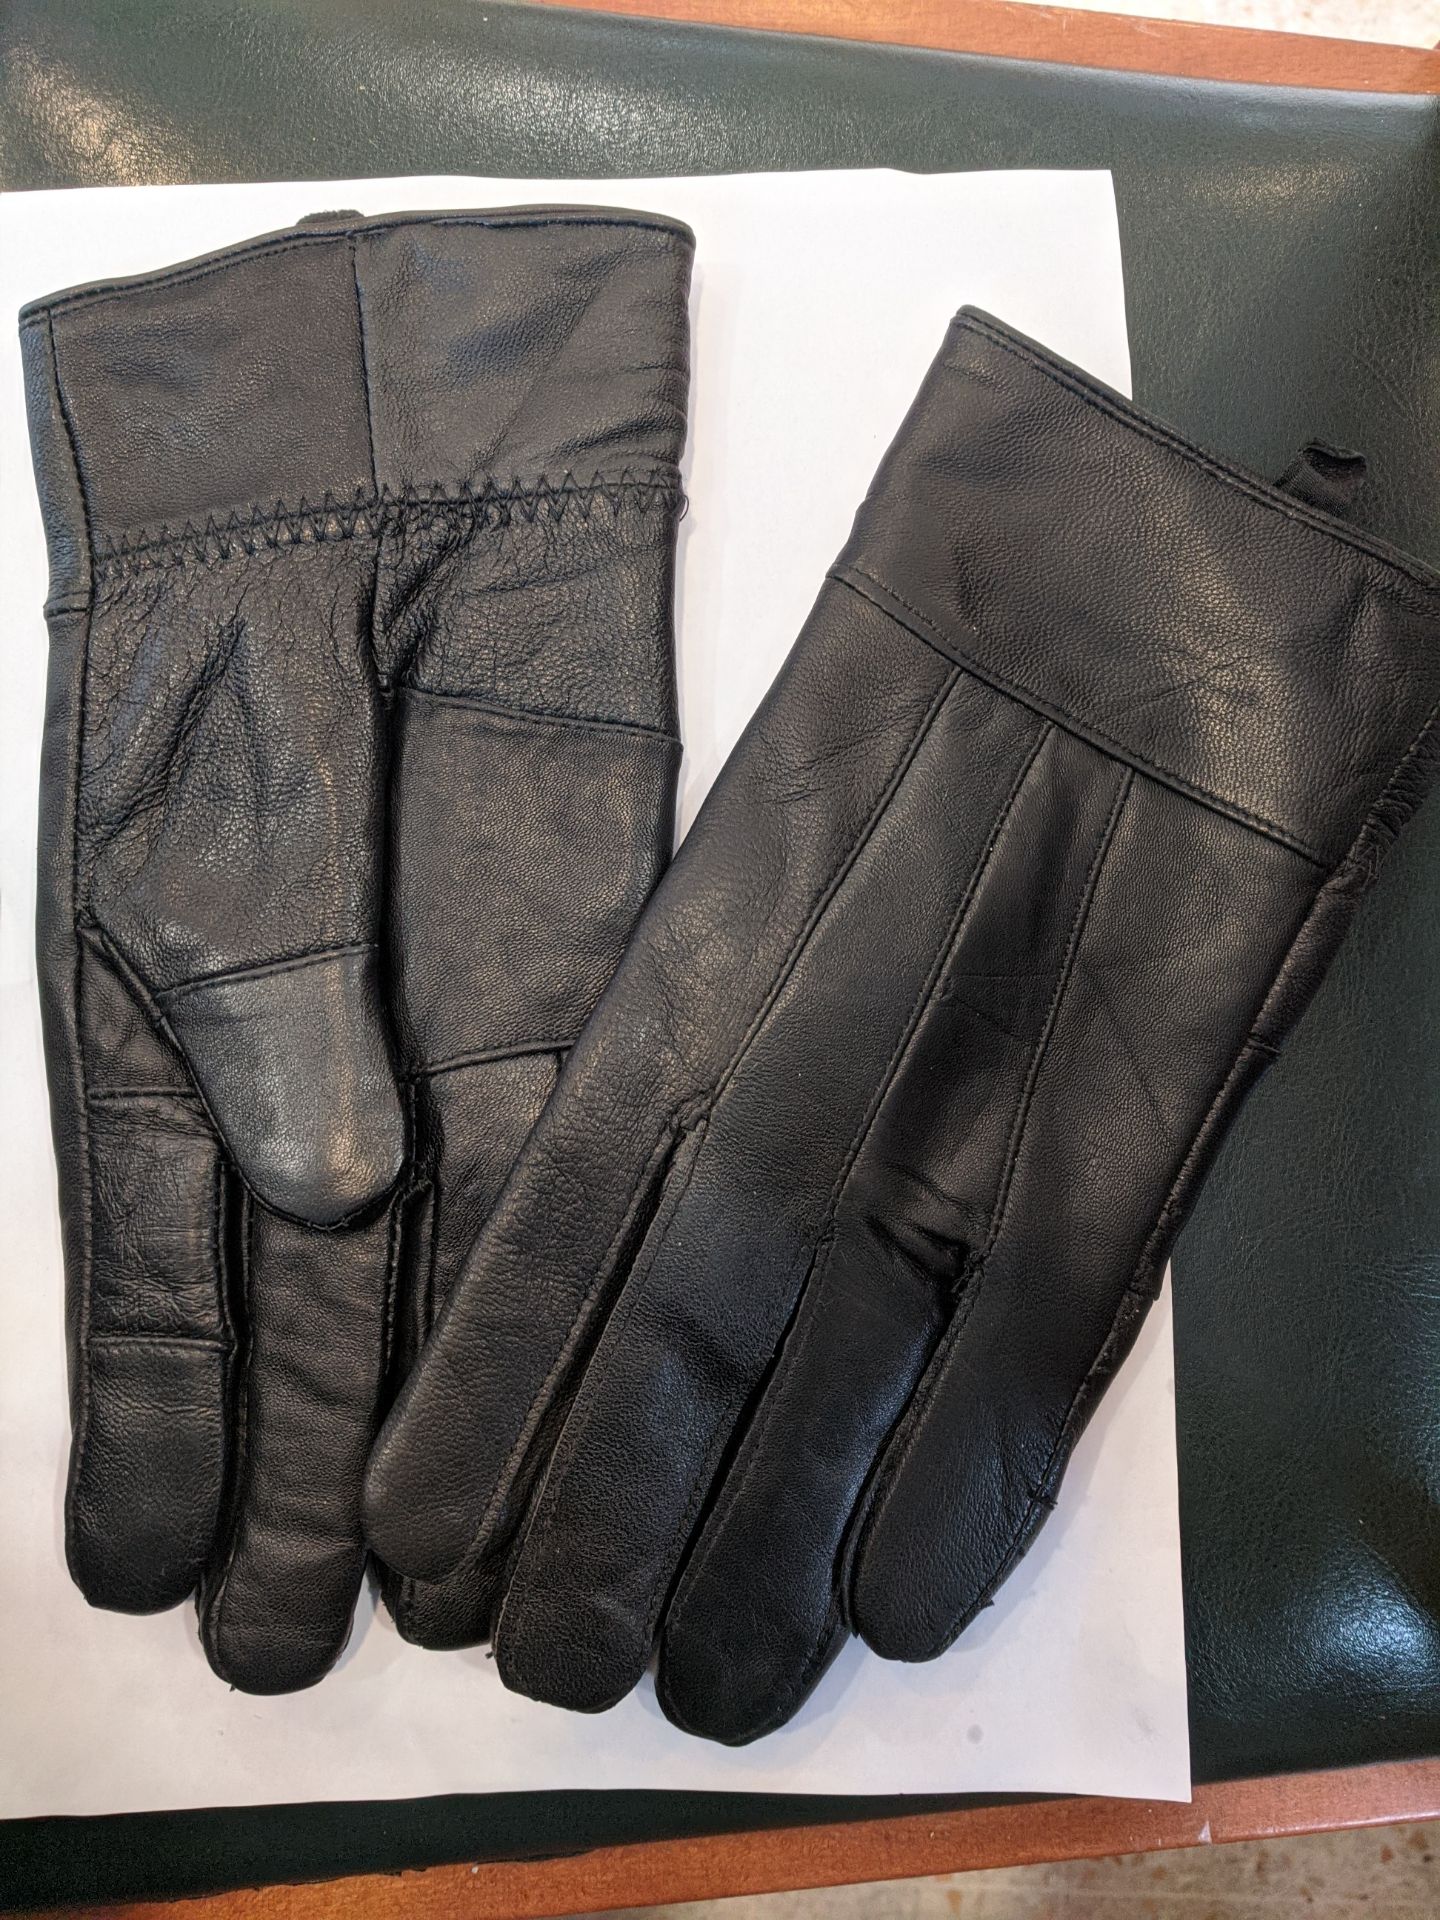 100 PAIRS OF NEW AND SEALED THINSULATE 3m LEATHER GLOVES, FLEECE LINED INSIDE, MEDIUM *PLUS VAT* - Image 3 of 4